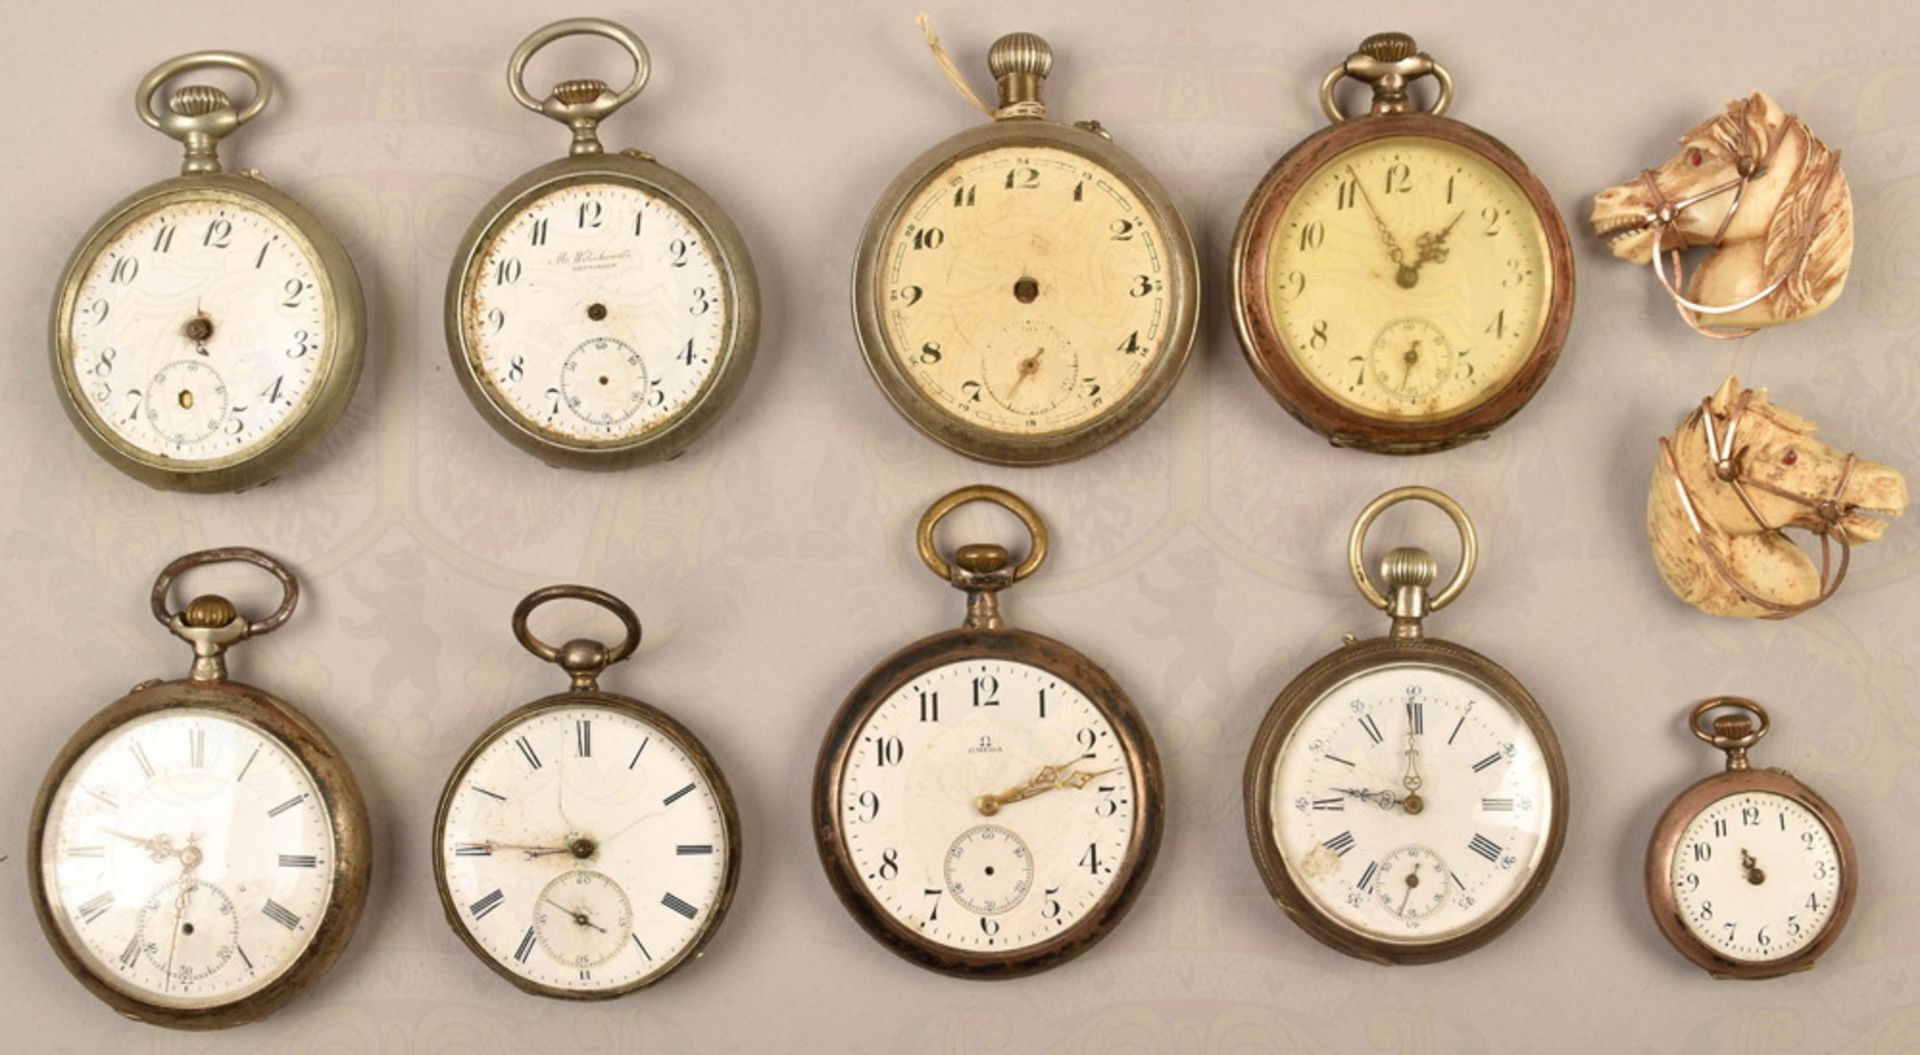 9 different pocket watches